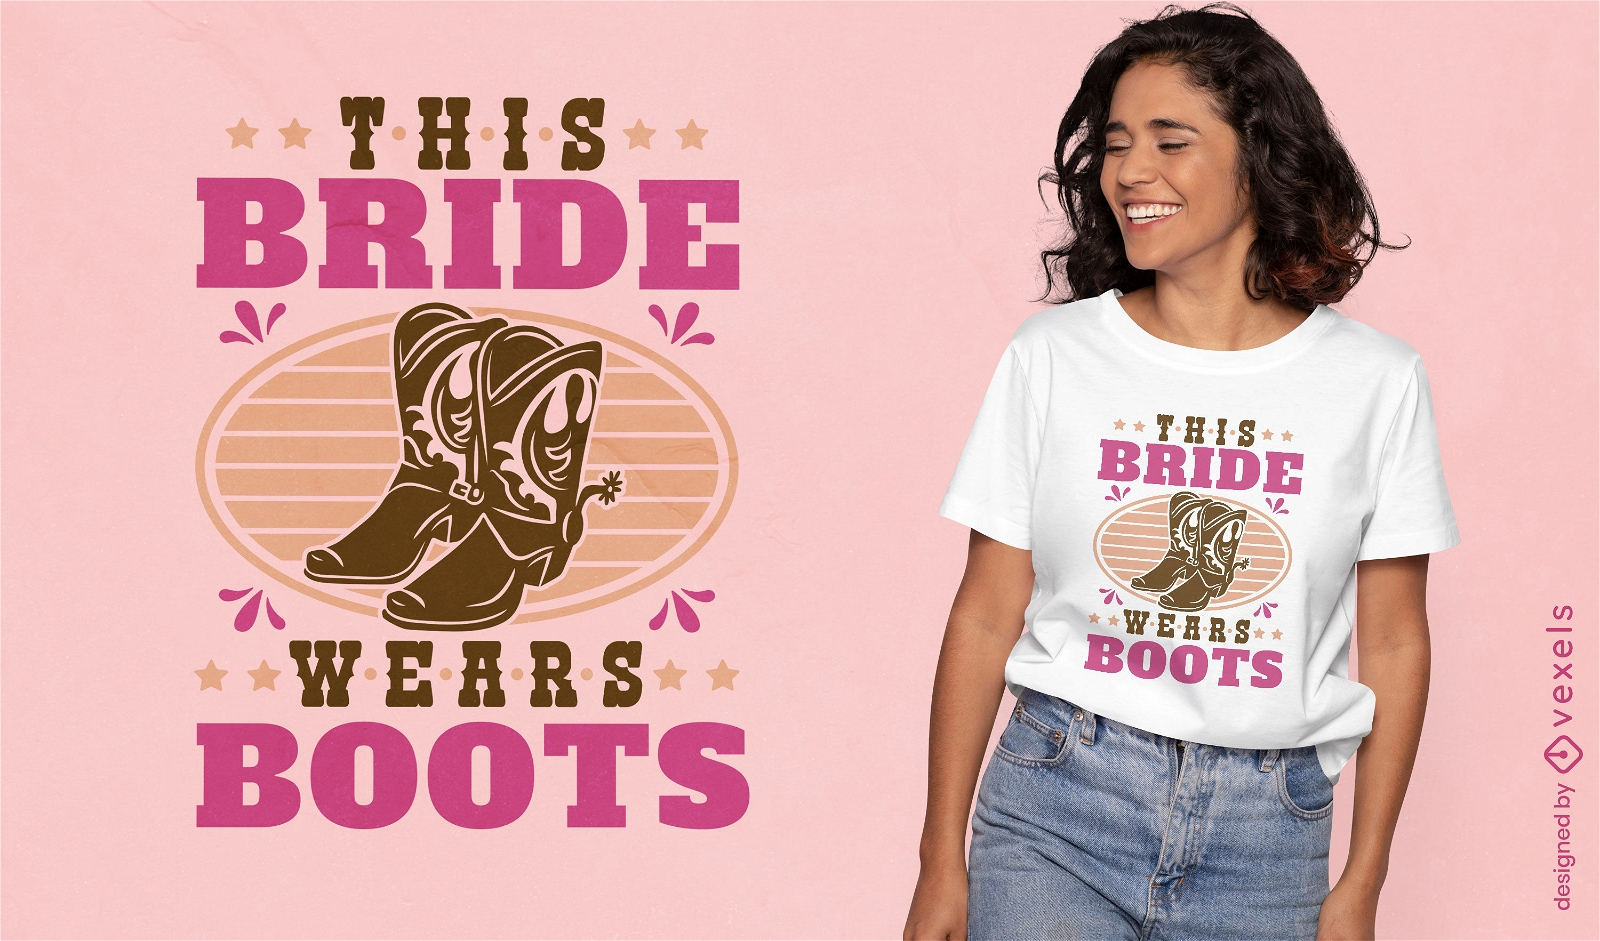 Bride in boots t-shirt design